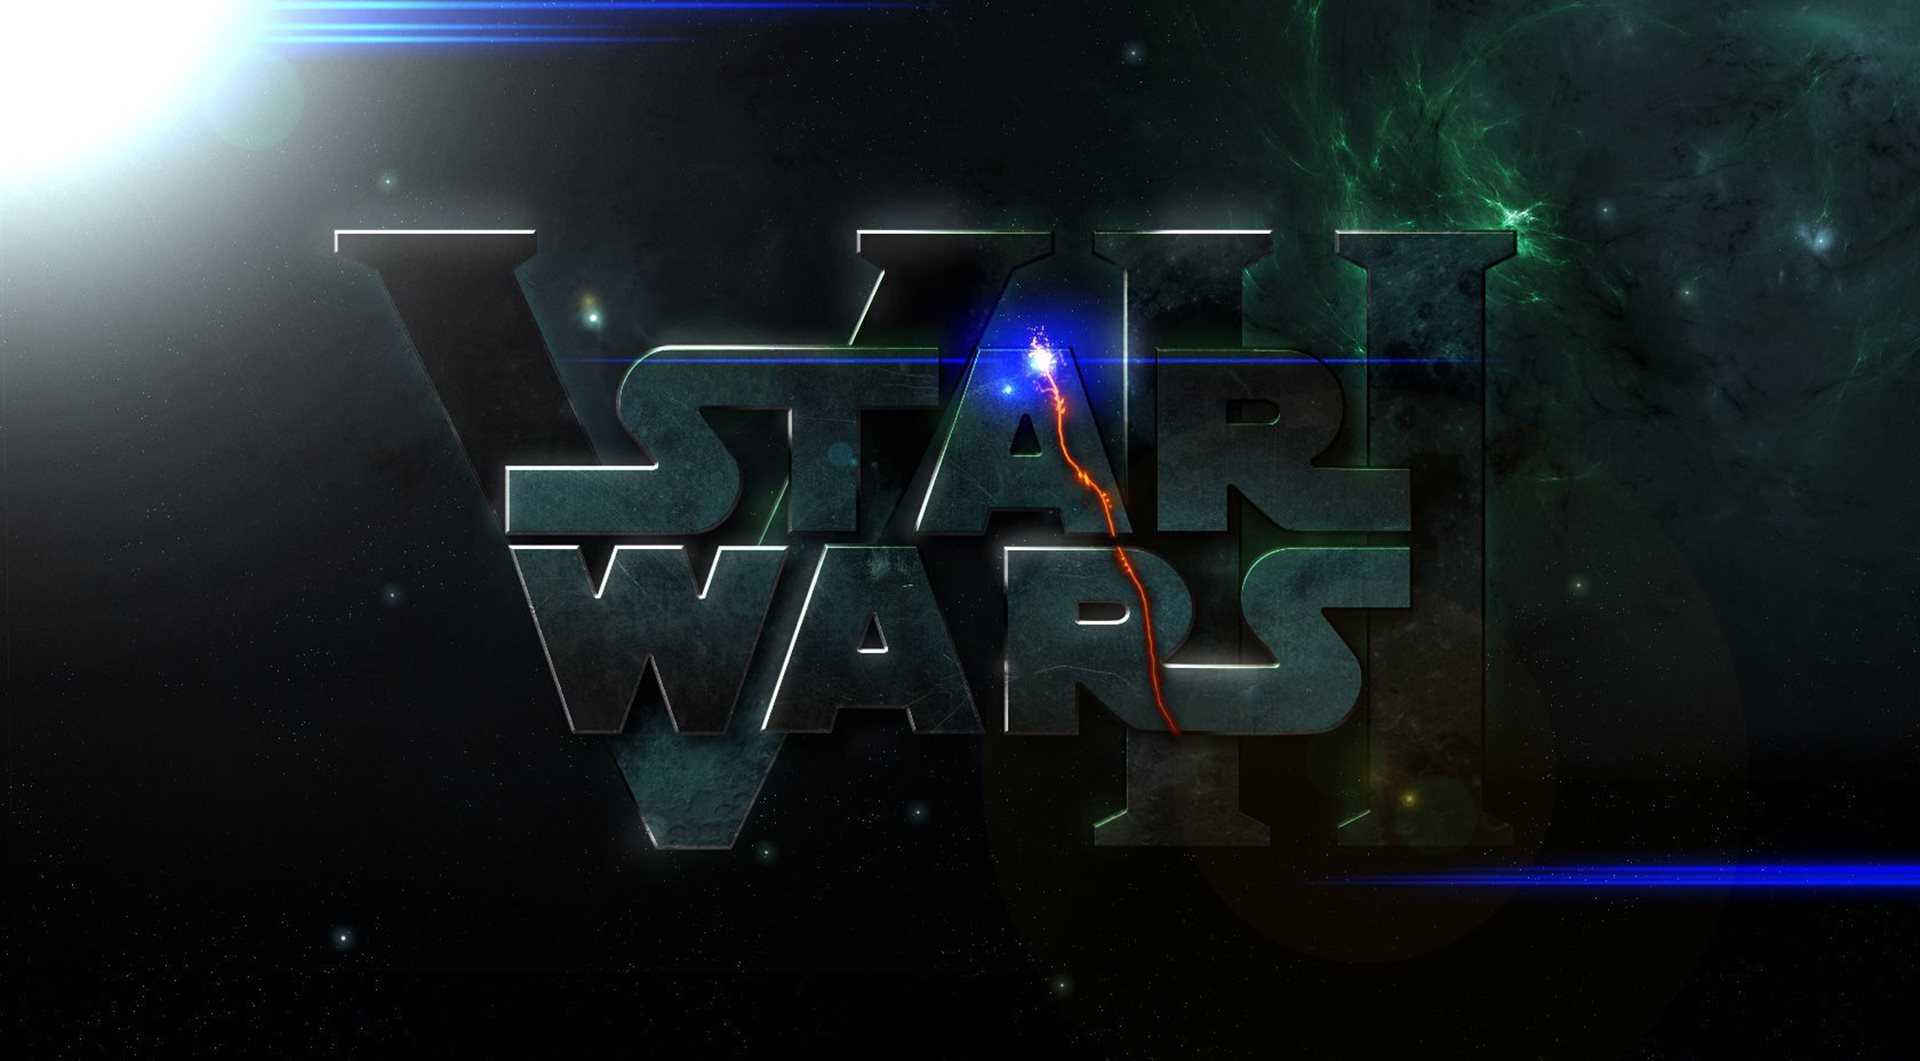  Wars Episode VII The Force Awakens Poster DreamLoveWallpapers